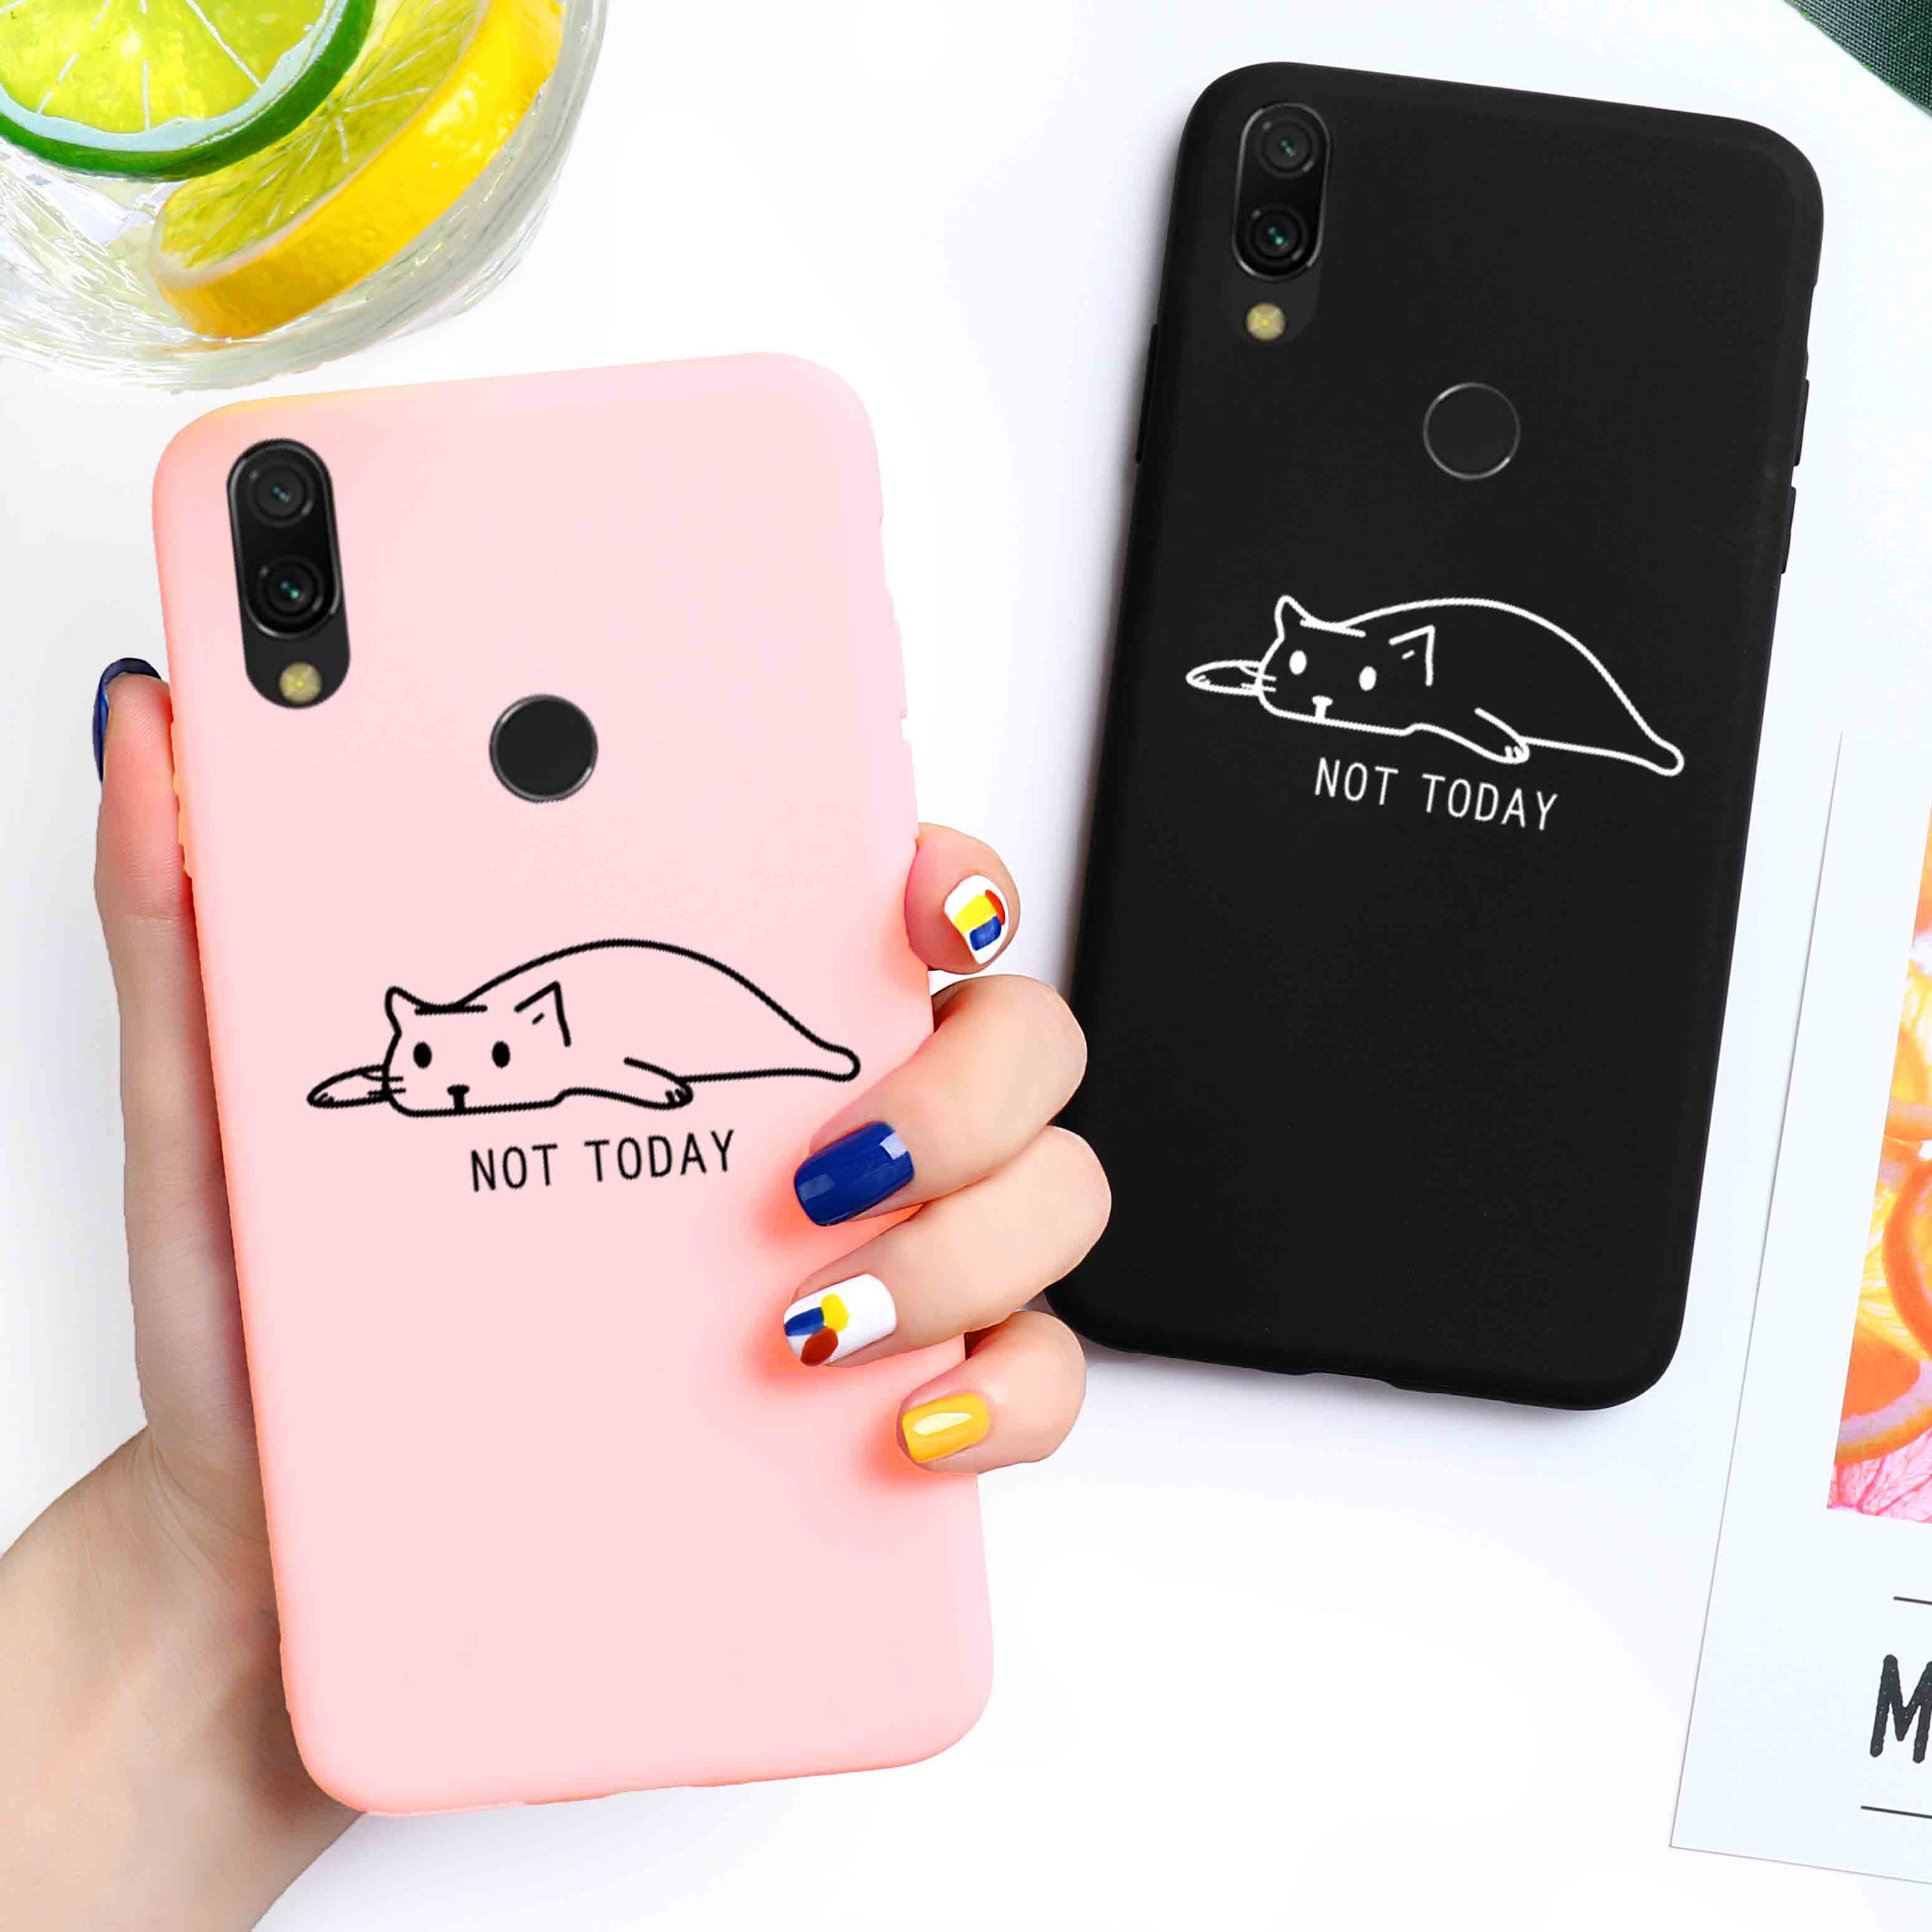 solid candy color silicone case on for xiaomi redmi note 7 note7 pro / redmi  7 yellow